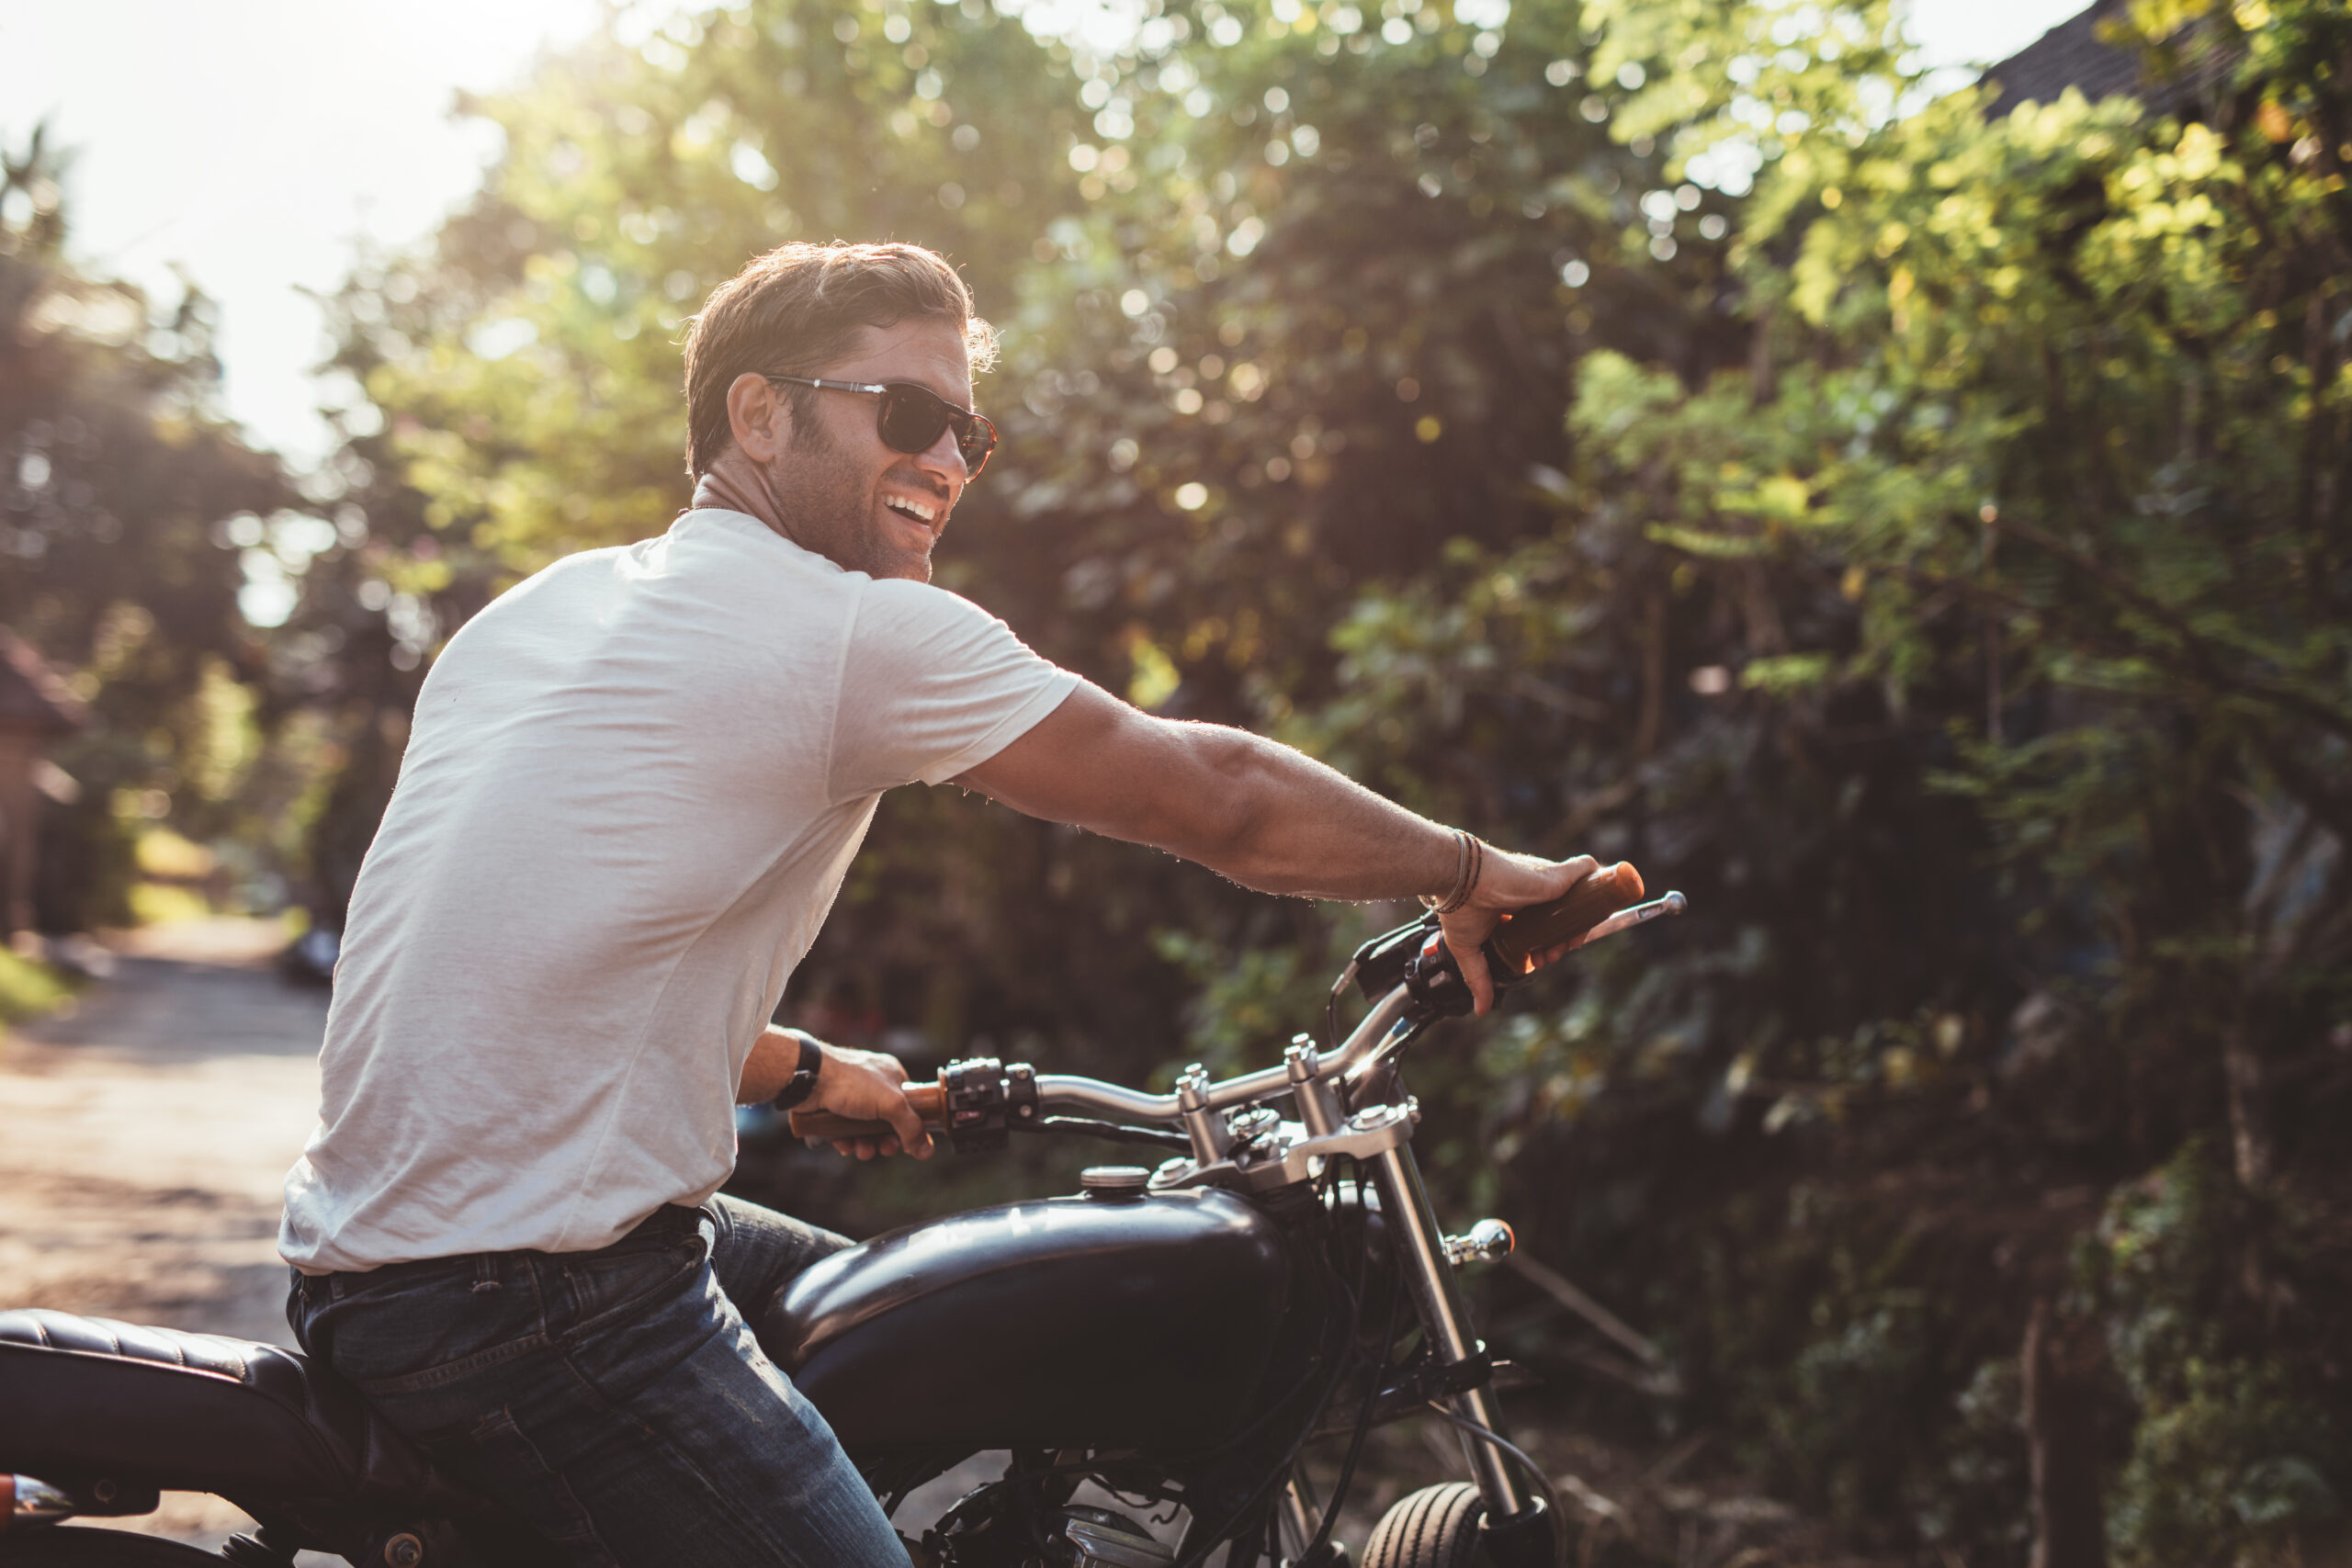 This blog is about the mental and physical benefits from riding motorcycles.